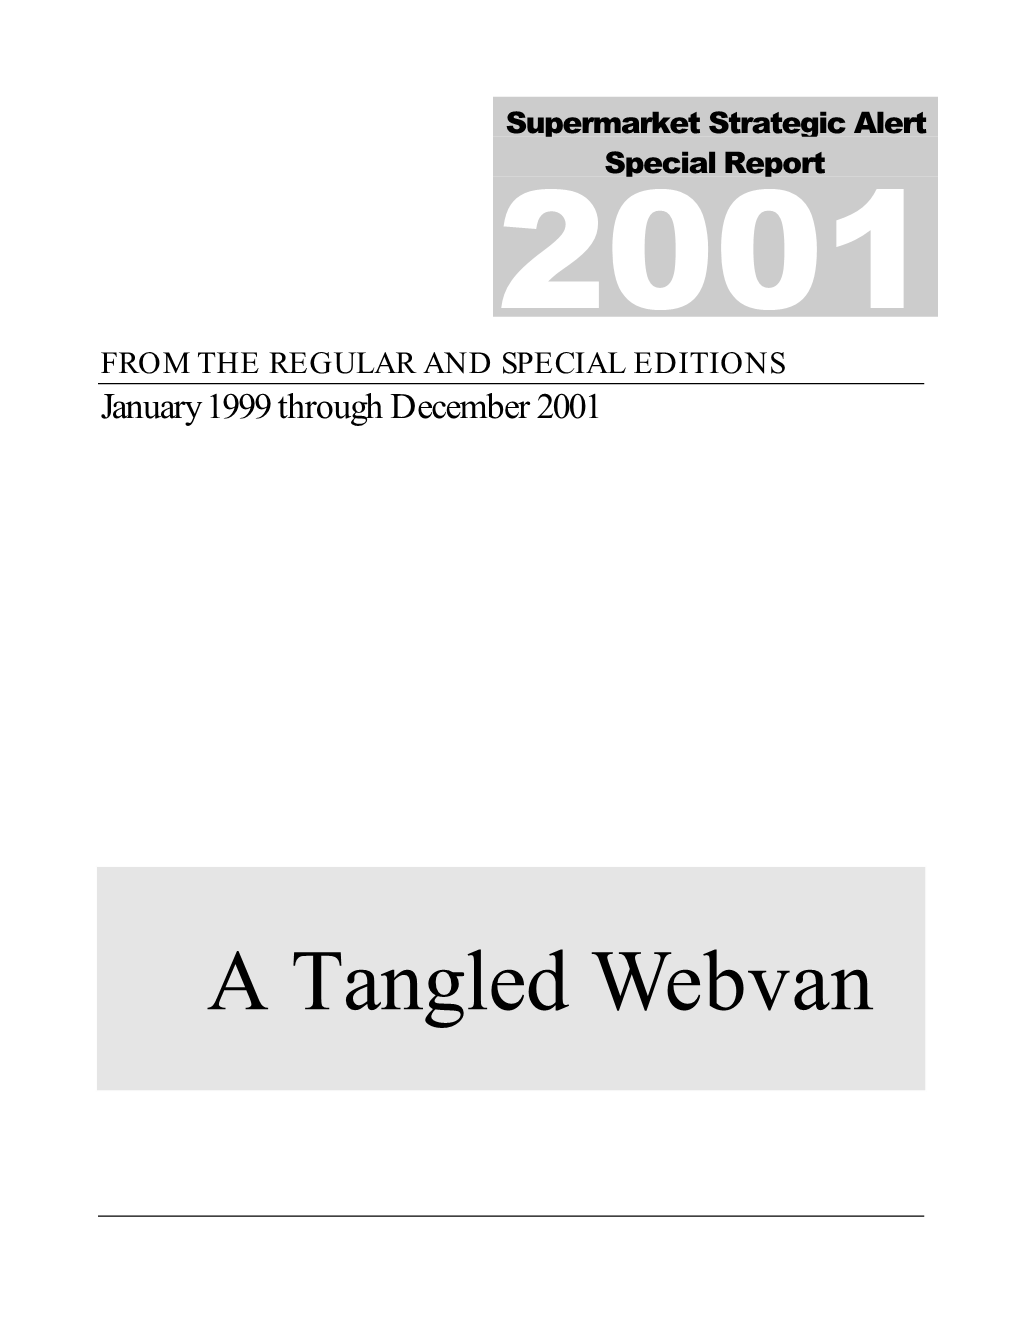 A Tangled Webvan from the REGULAR and SPECIAL EDITIONS Special Report: 2001